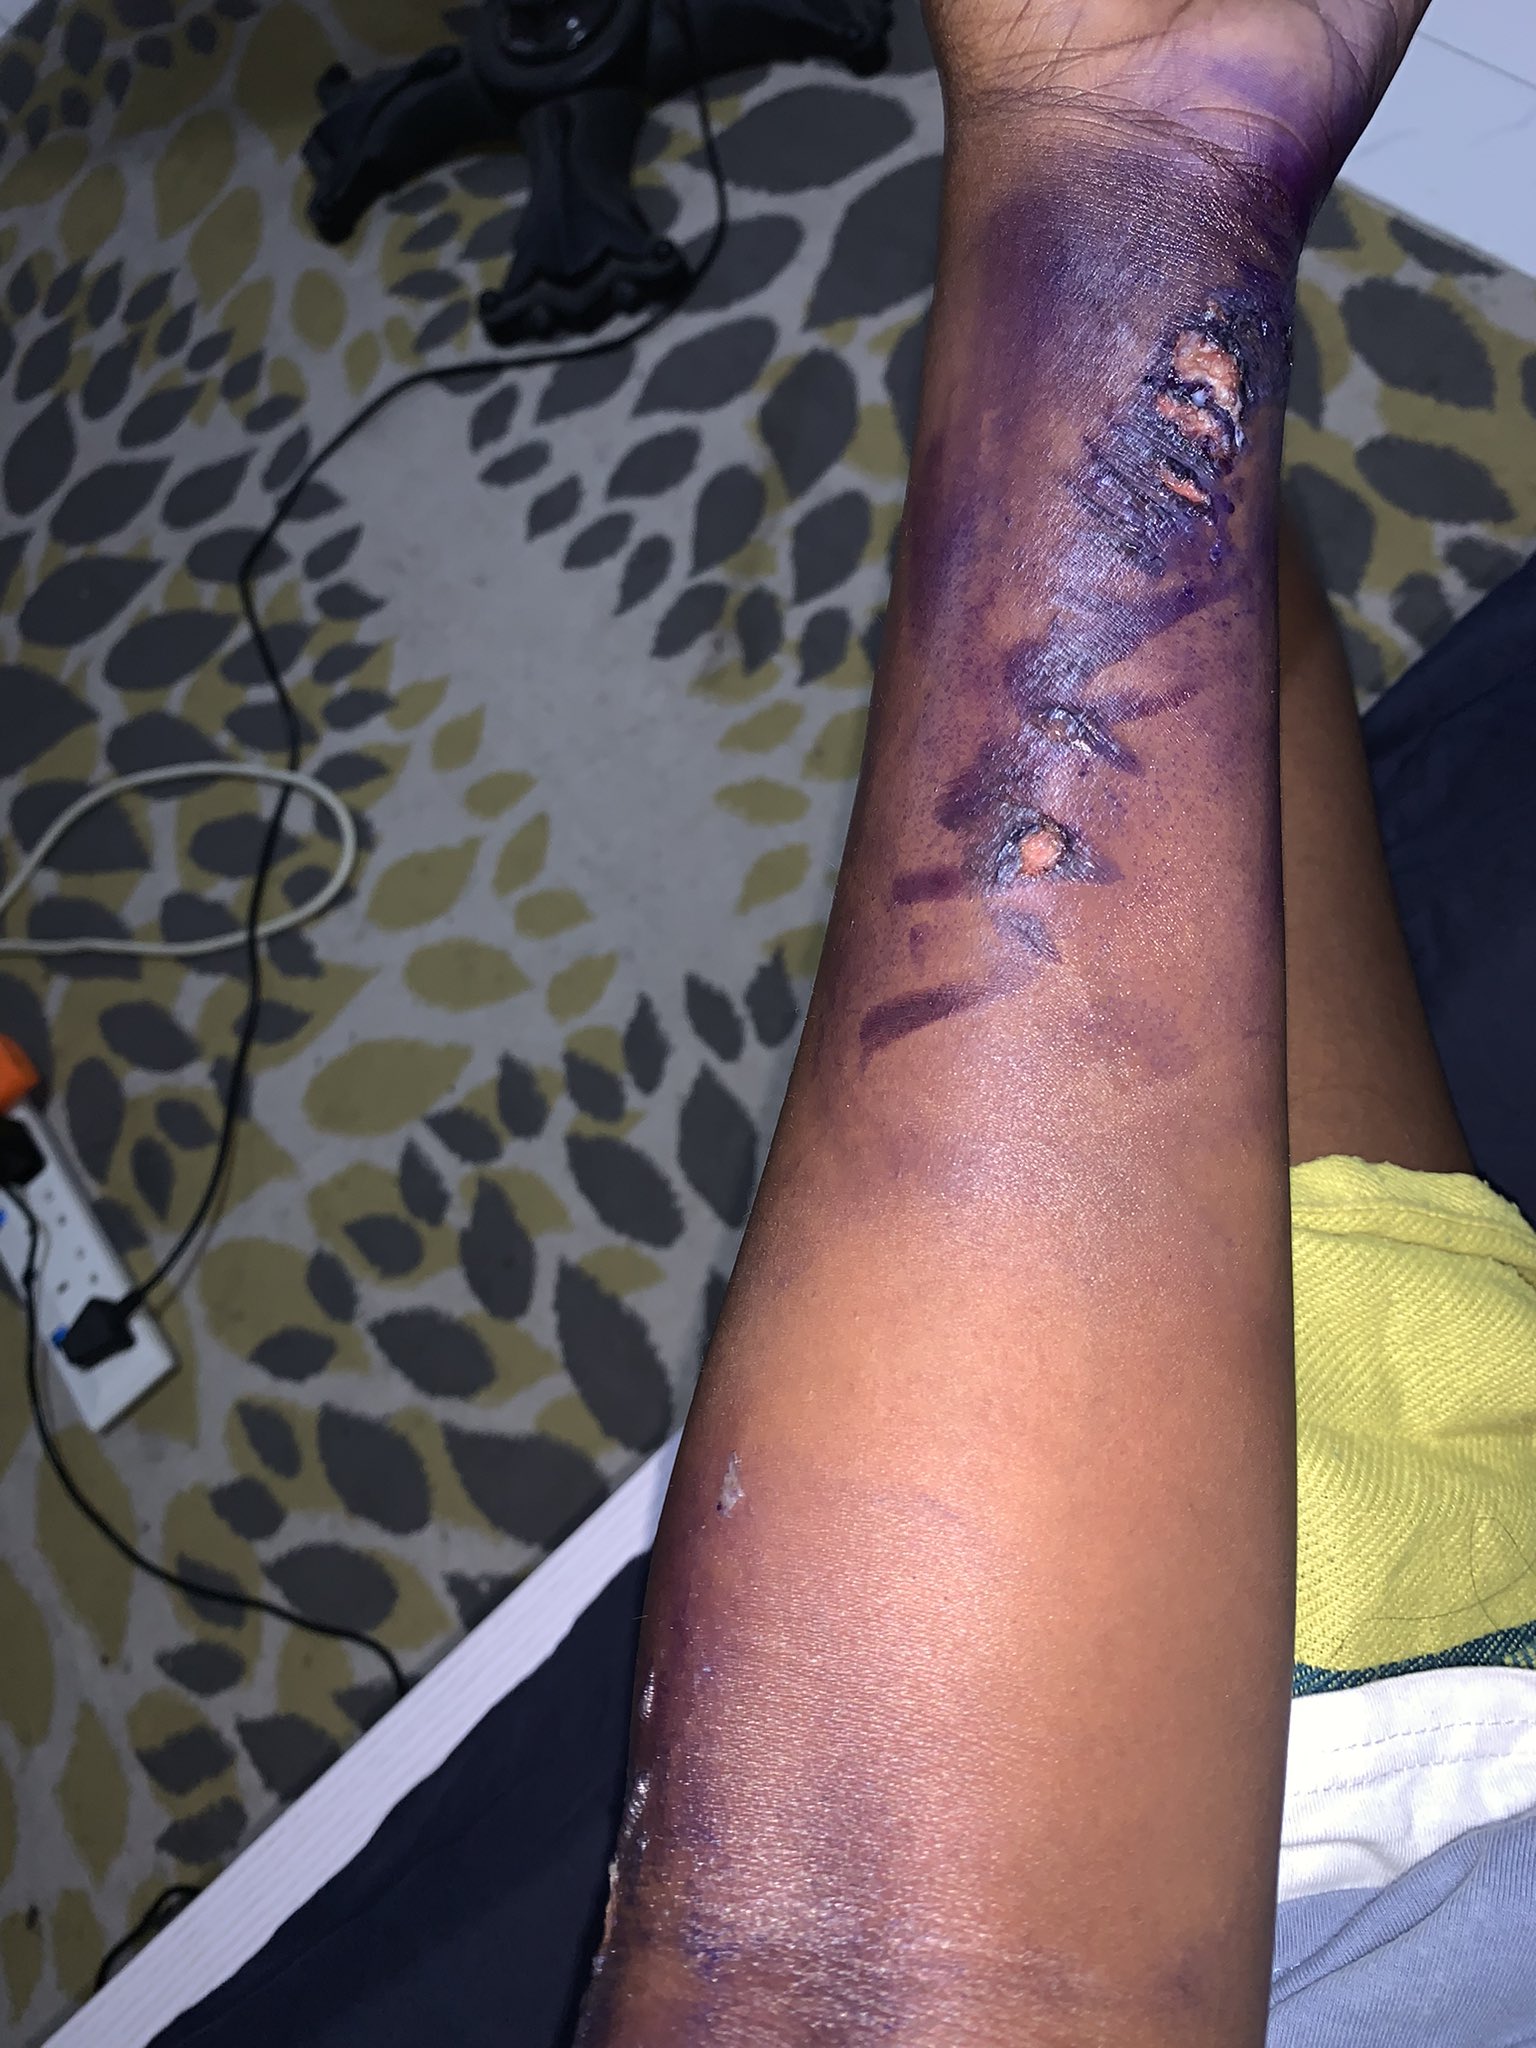 Lady narrowly escapes death after falling live wire electrocuted her while strolling in Lagos [photos]